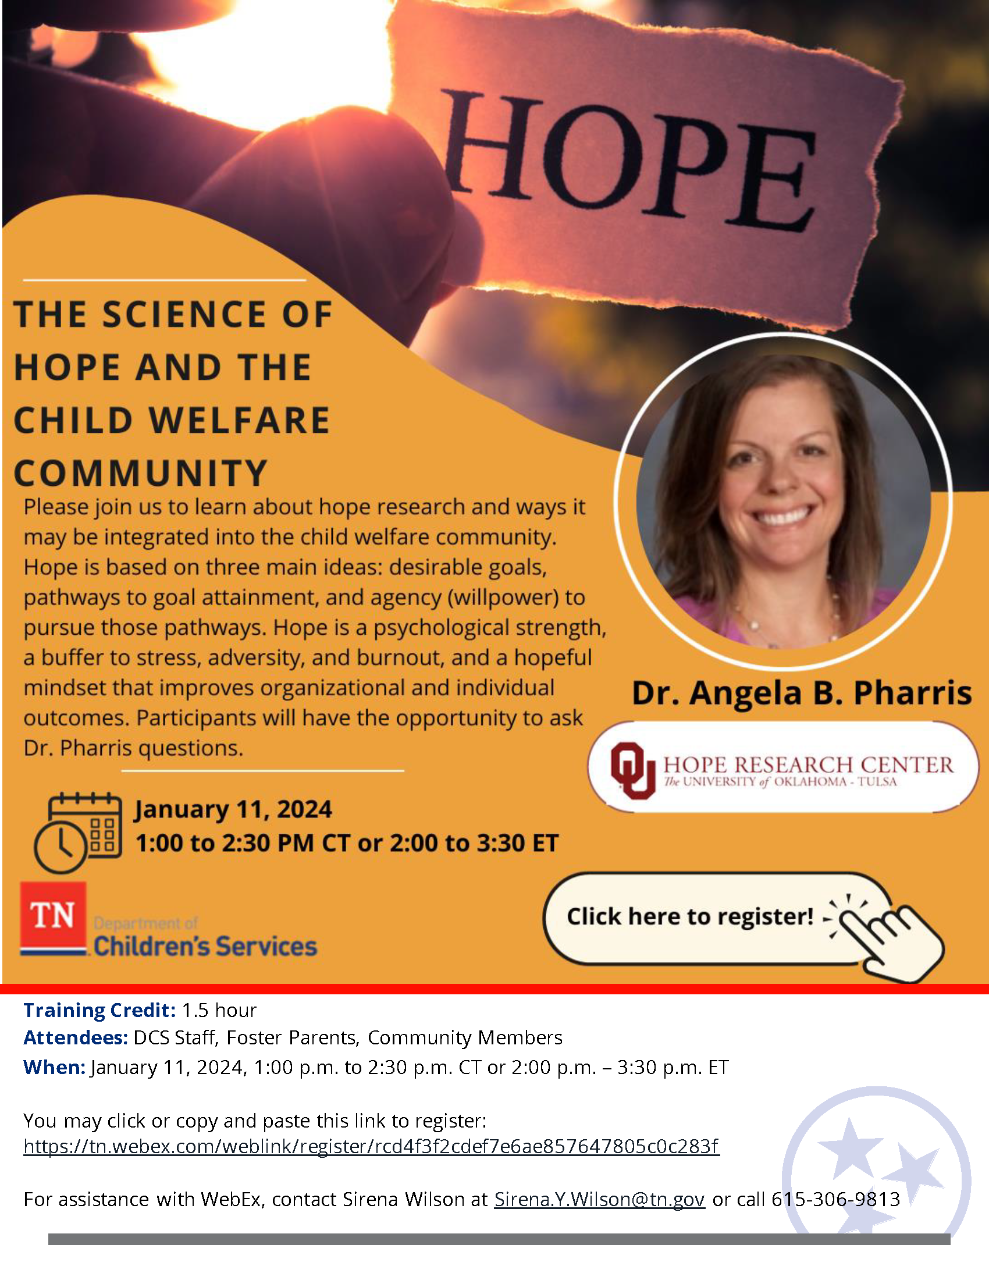 Research about hope and the child welfare community with Dr. Angela Pharris of the University of Oklahoma registration - Webex